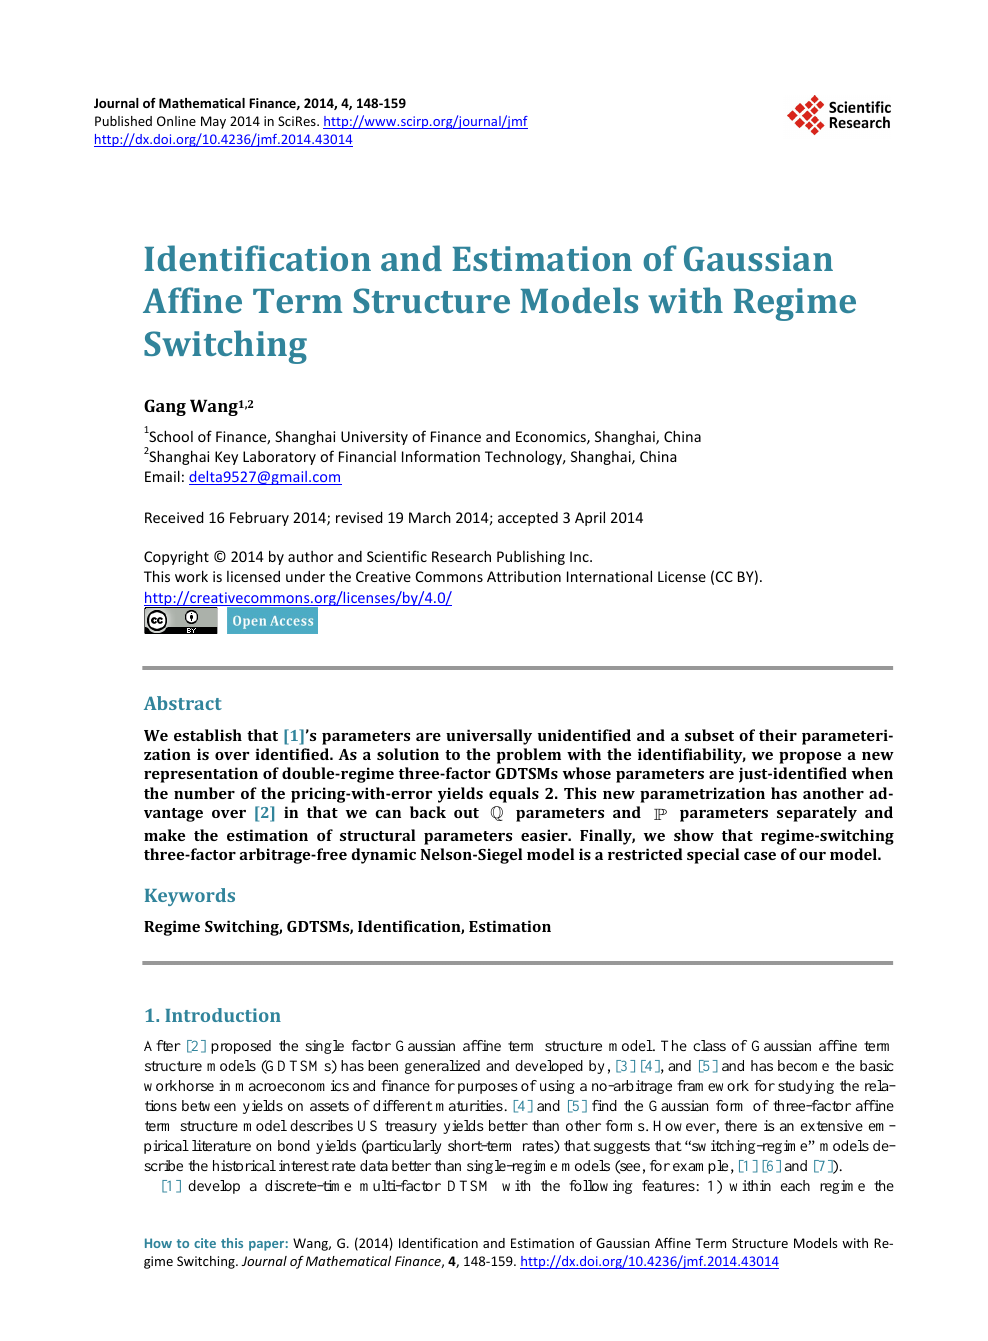 Identification And Estimation Of Gaussian Affine Term Structure Models With Regime Switching Topic Of Research Paper In Mathematics Download Scholarly Article Pdf And Read For Free On Cyberleninka Open Science Hub